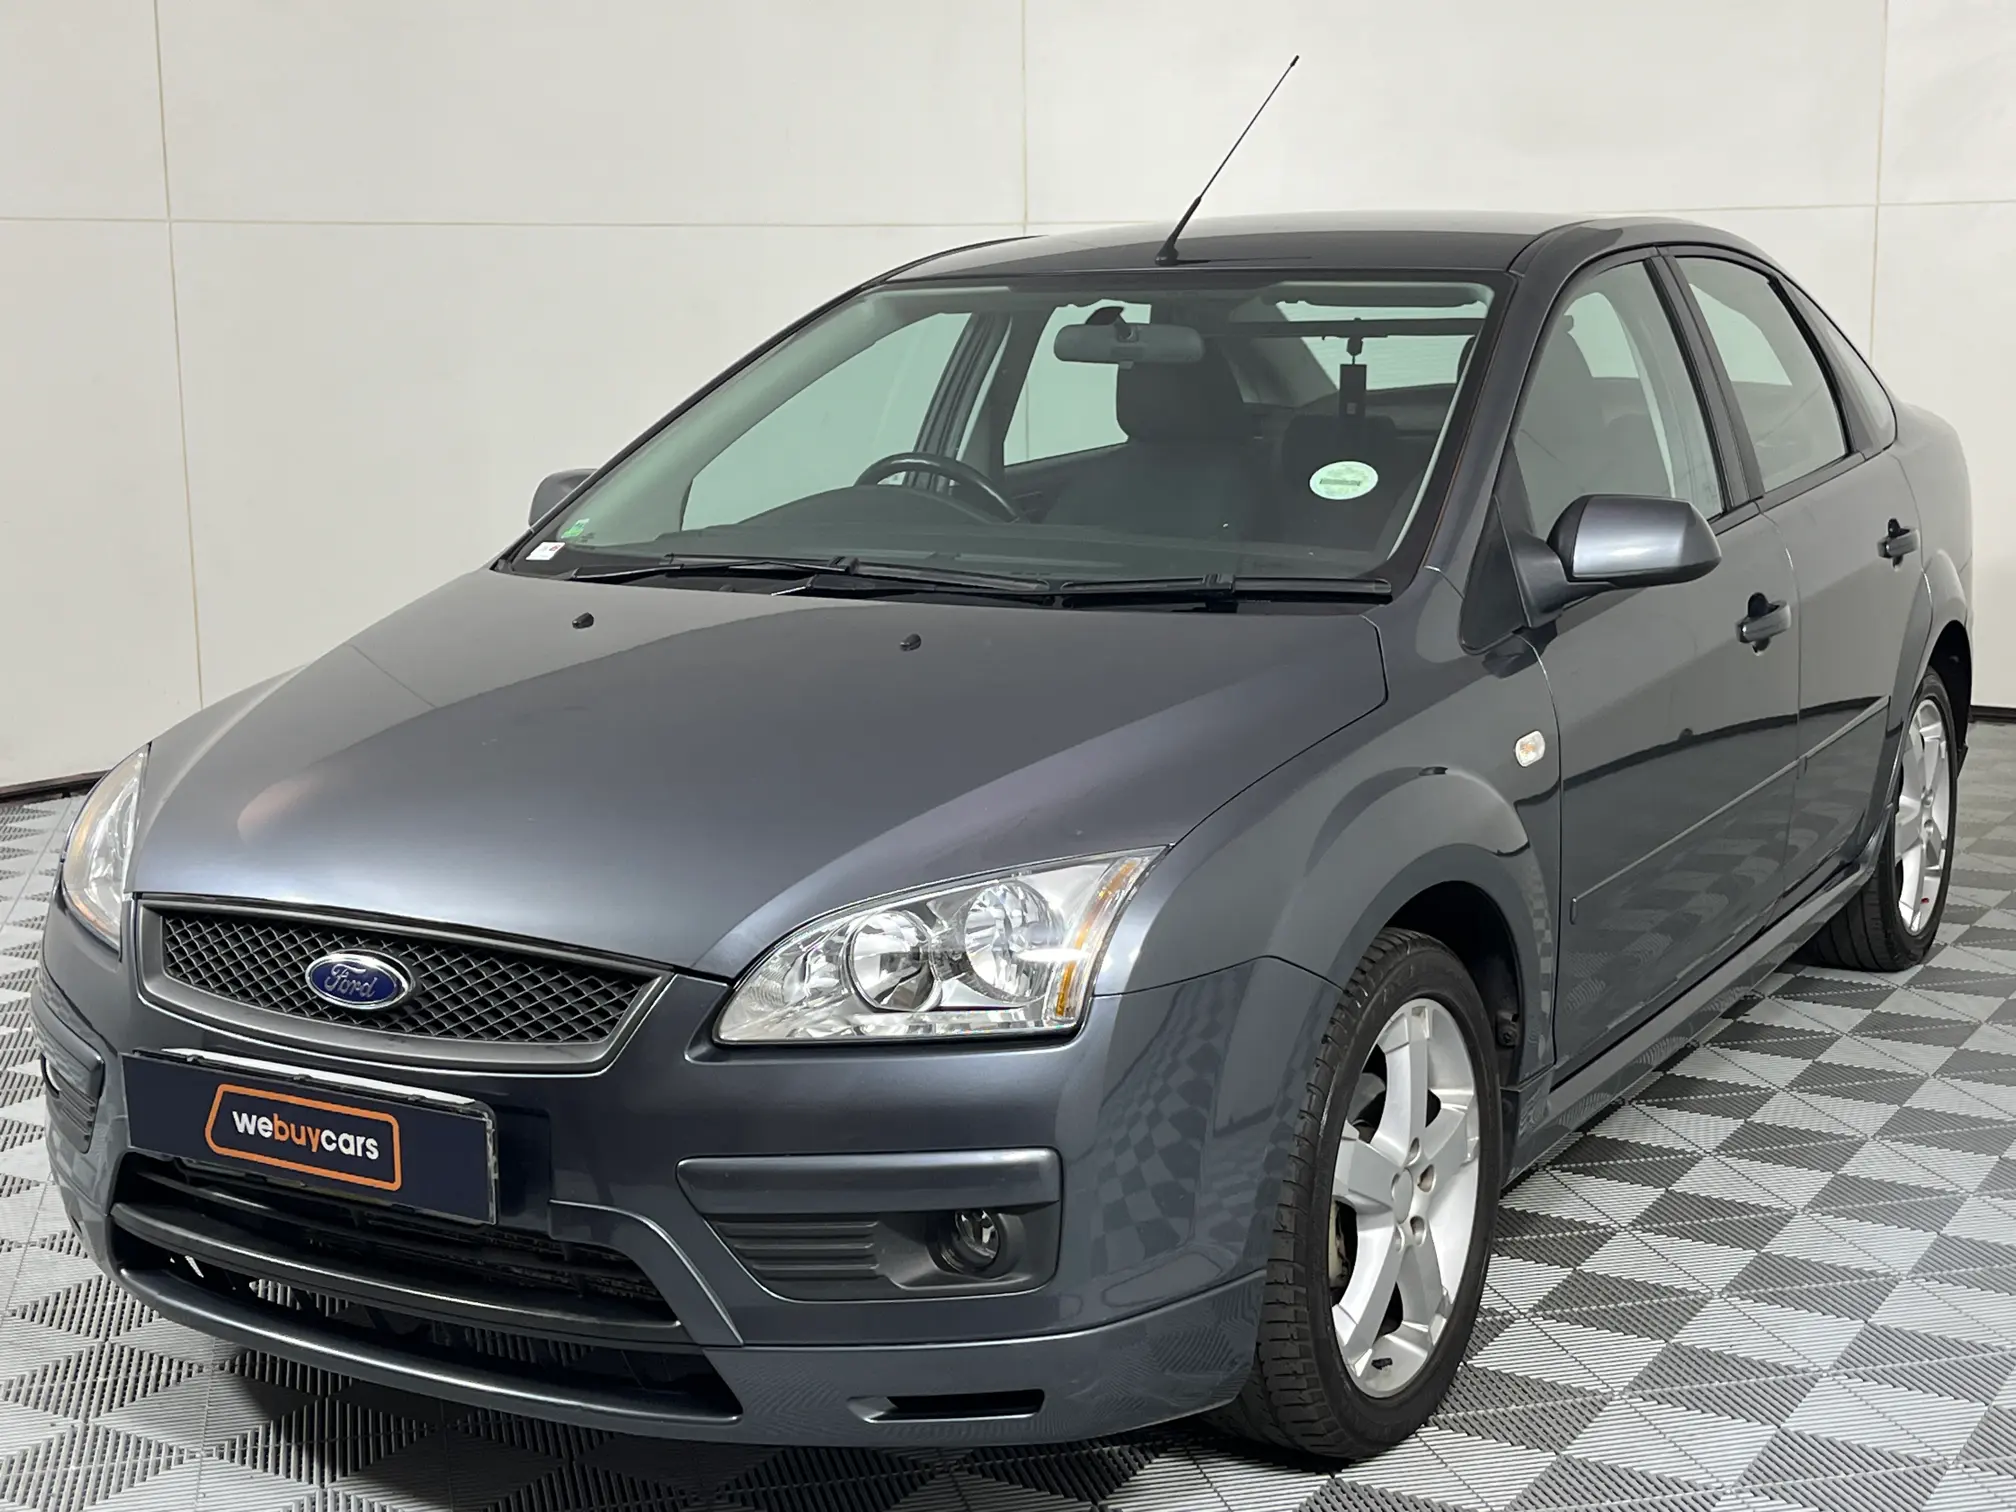 2007 Ford Focus 2.0 Trend